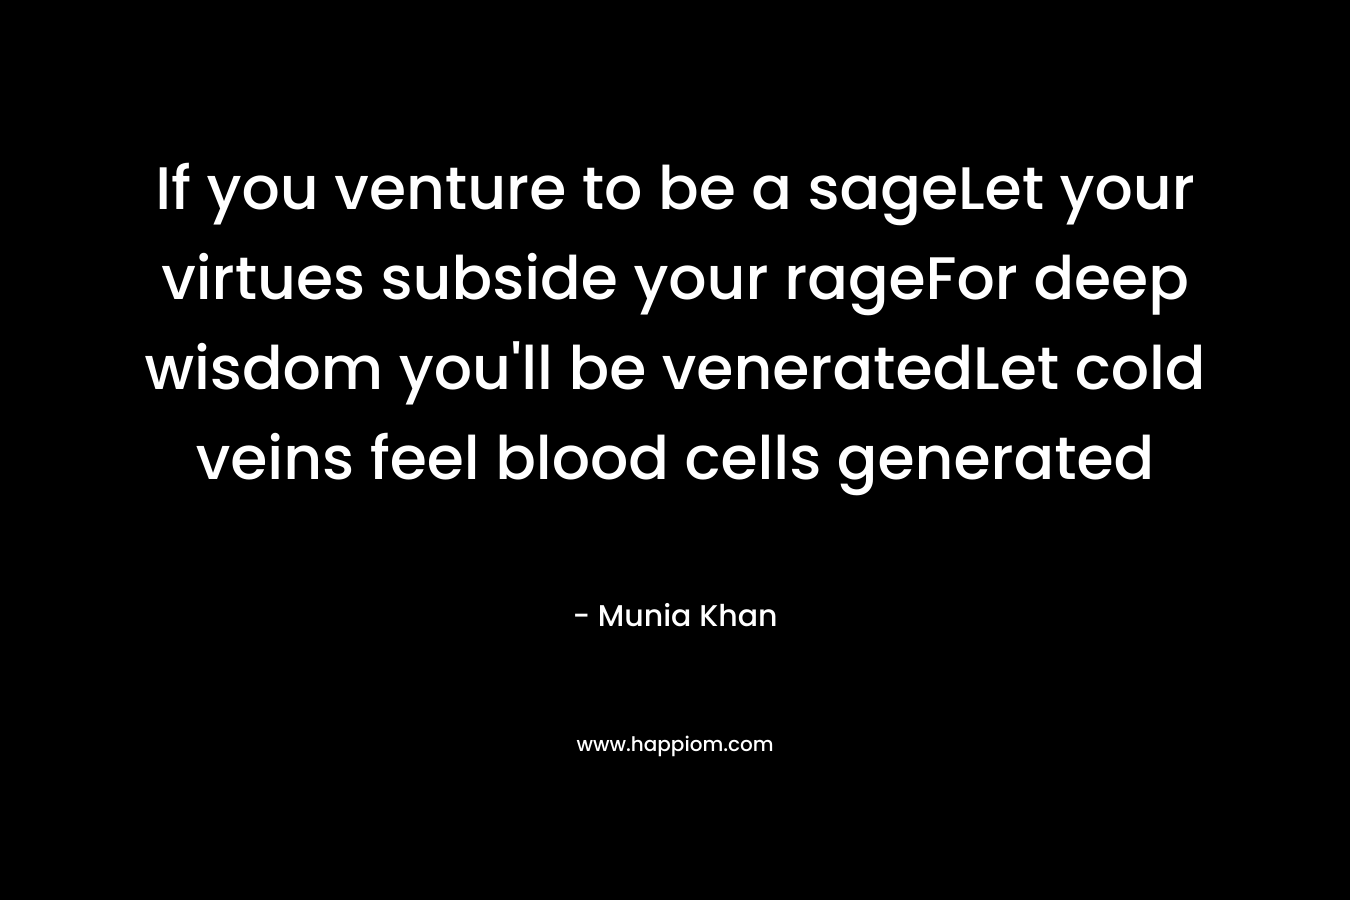 If you venture to be a sageLet your virtues subside your rageFor deep wisdom you'll be veneratedLet cold veins feel blood cells generated